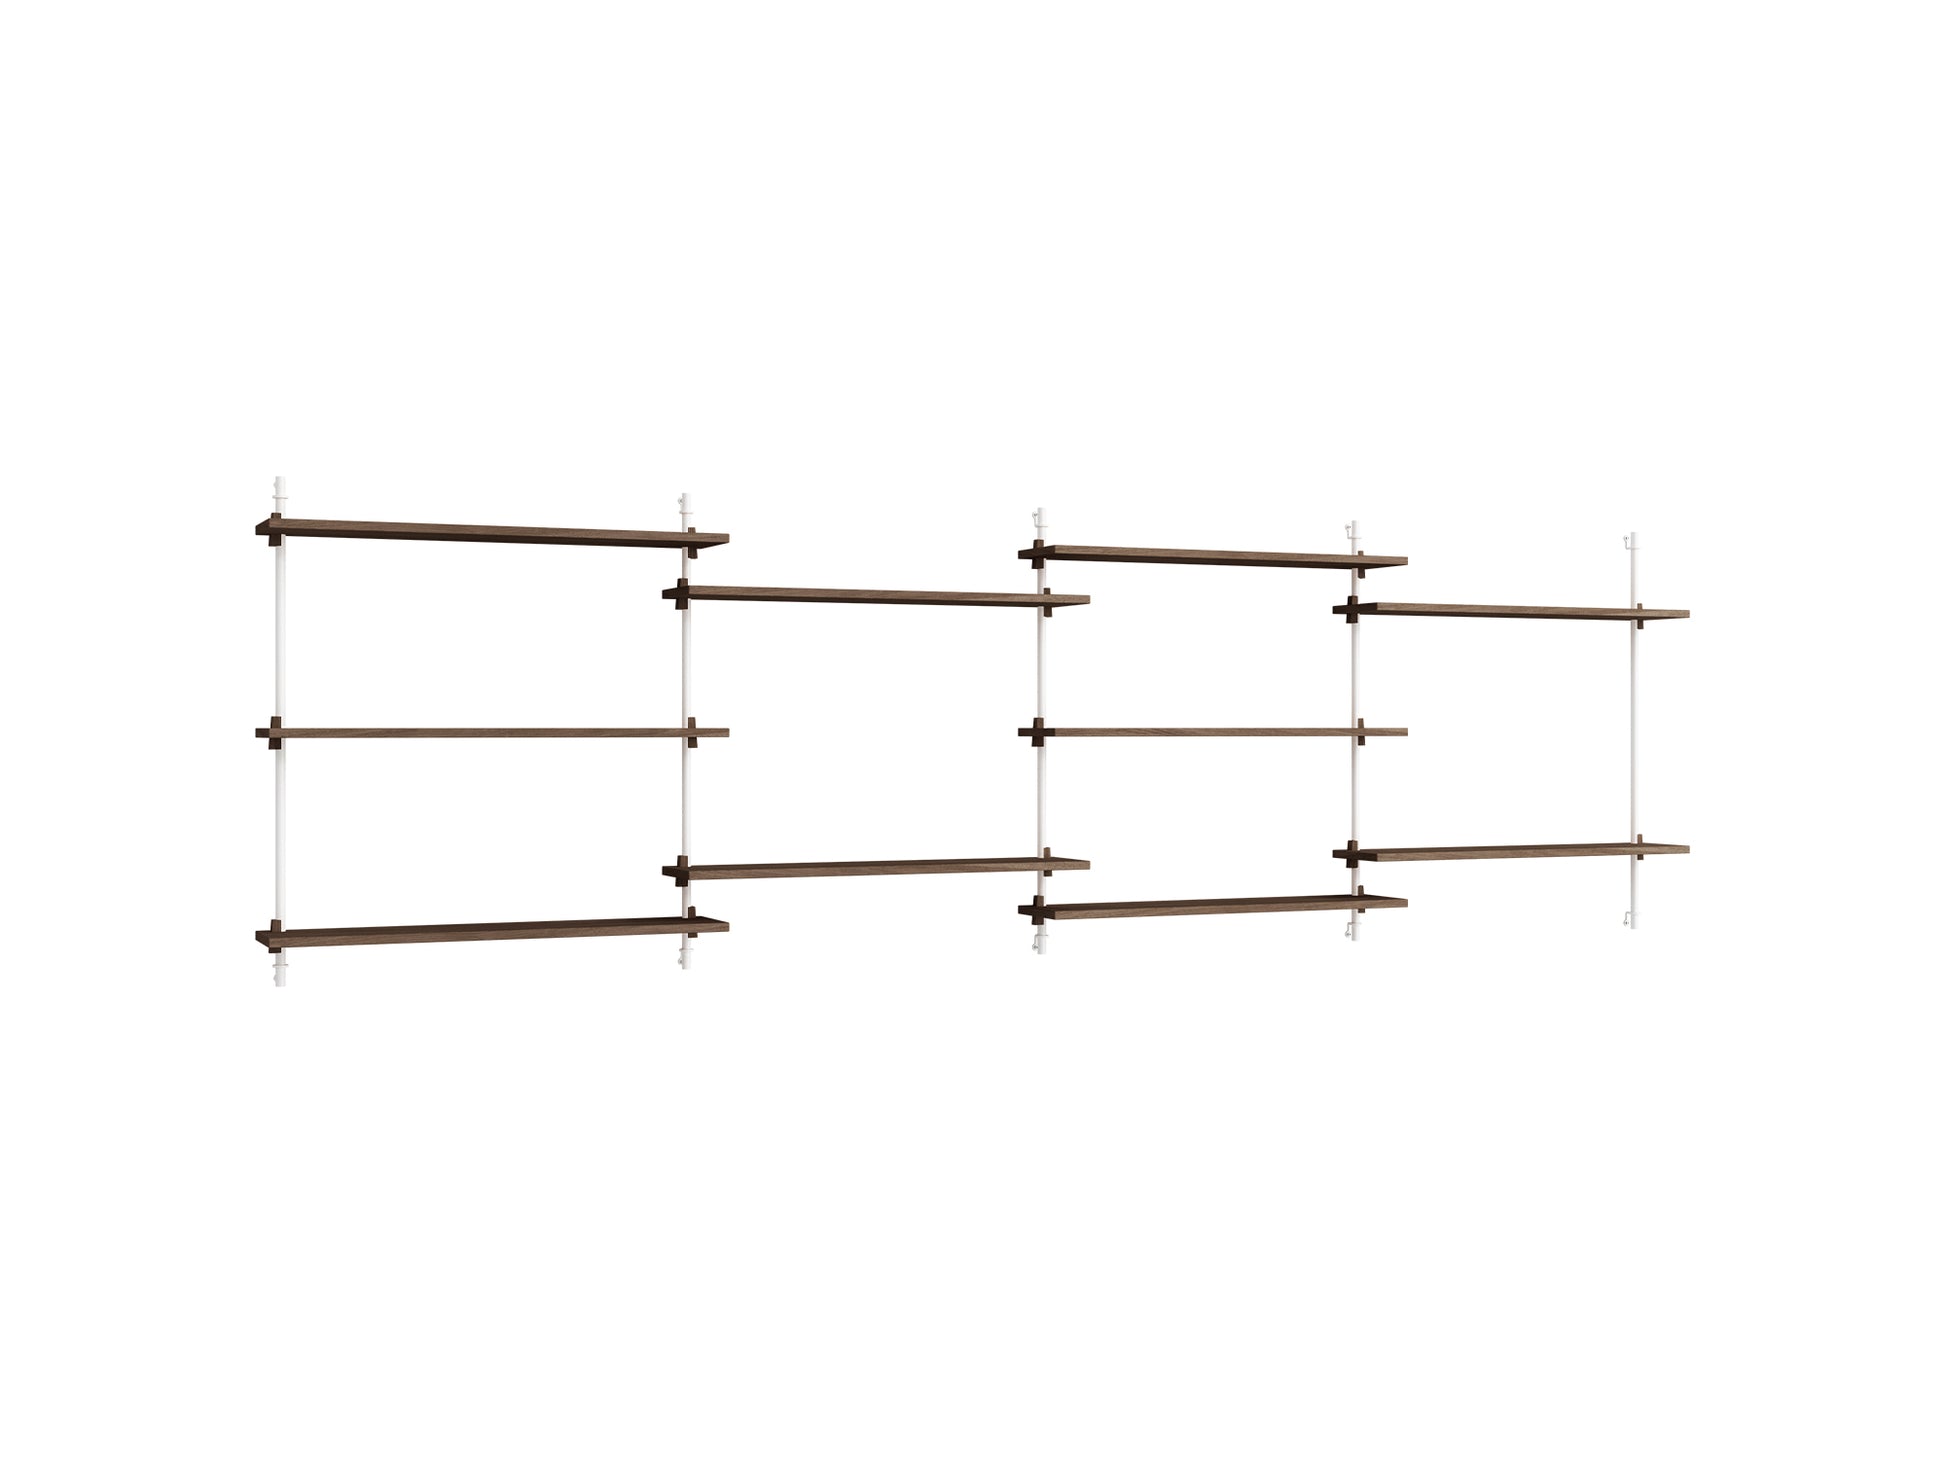 Wall Shelving System Sets (85 cm) by Moebe - WS.85.4 / White Uprights / Smoked Oak